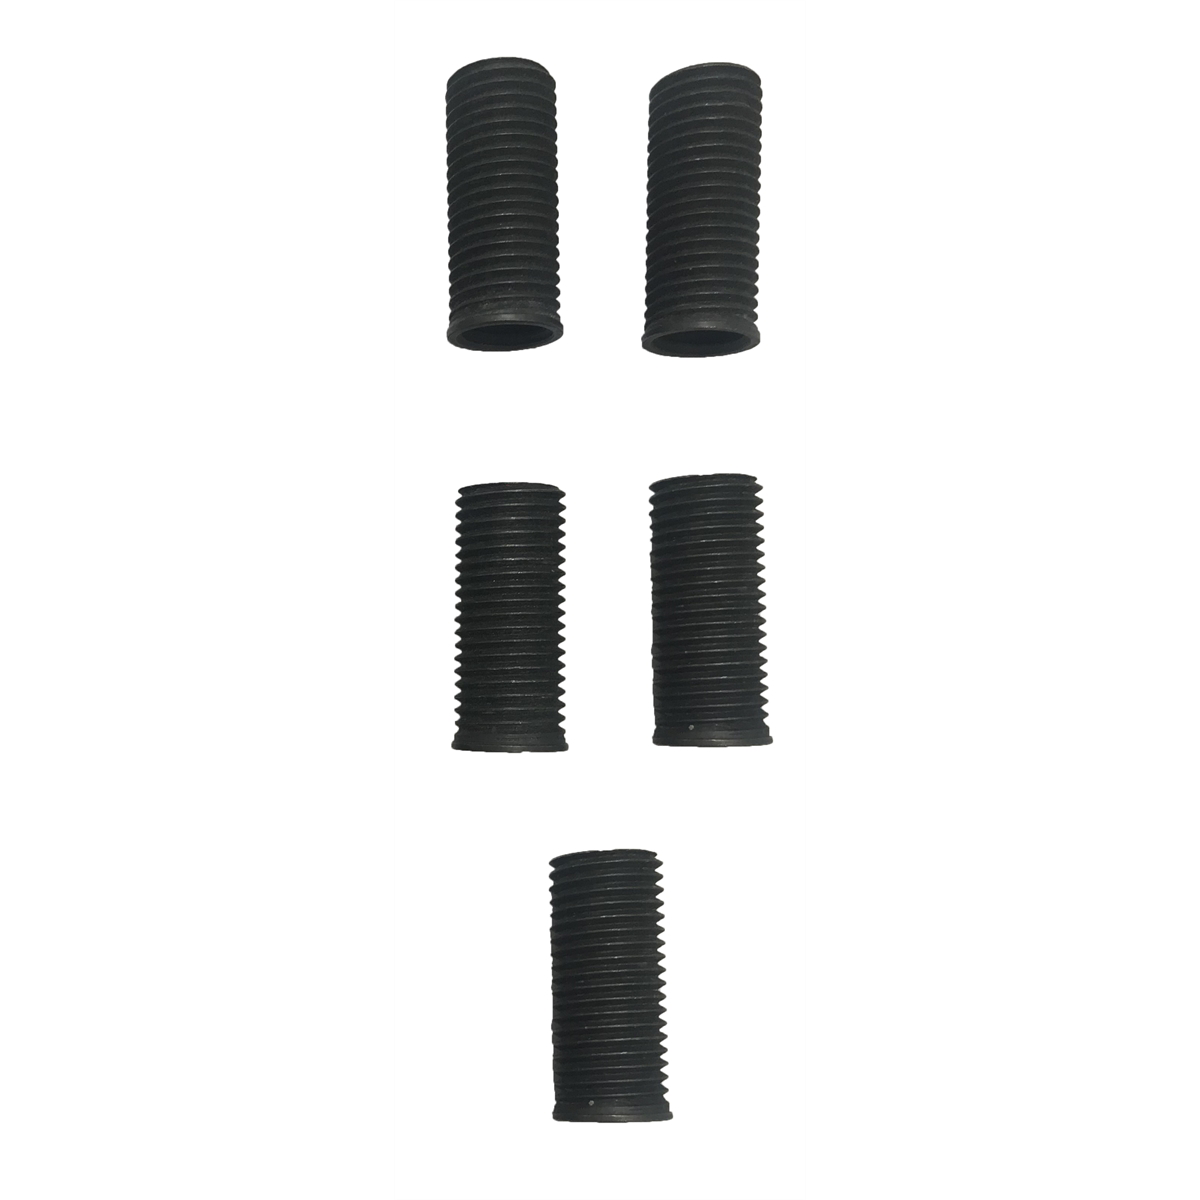 11mm Inserts - 5 Pack